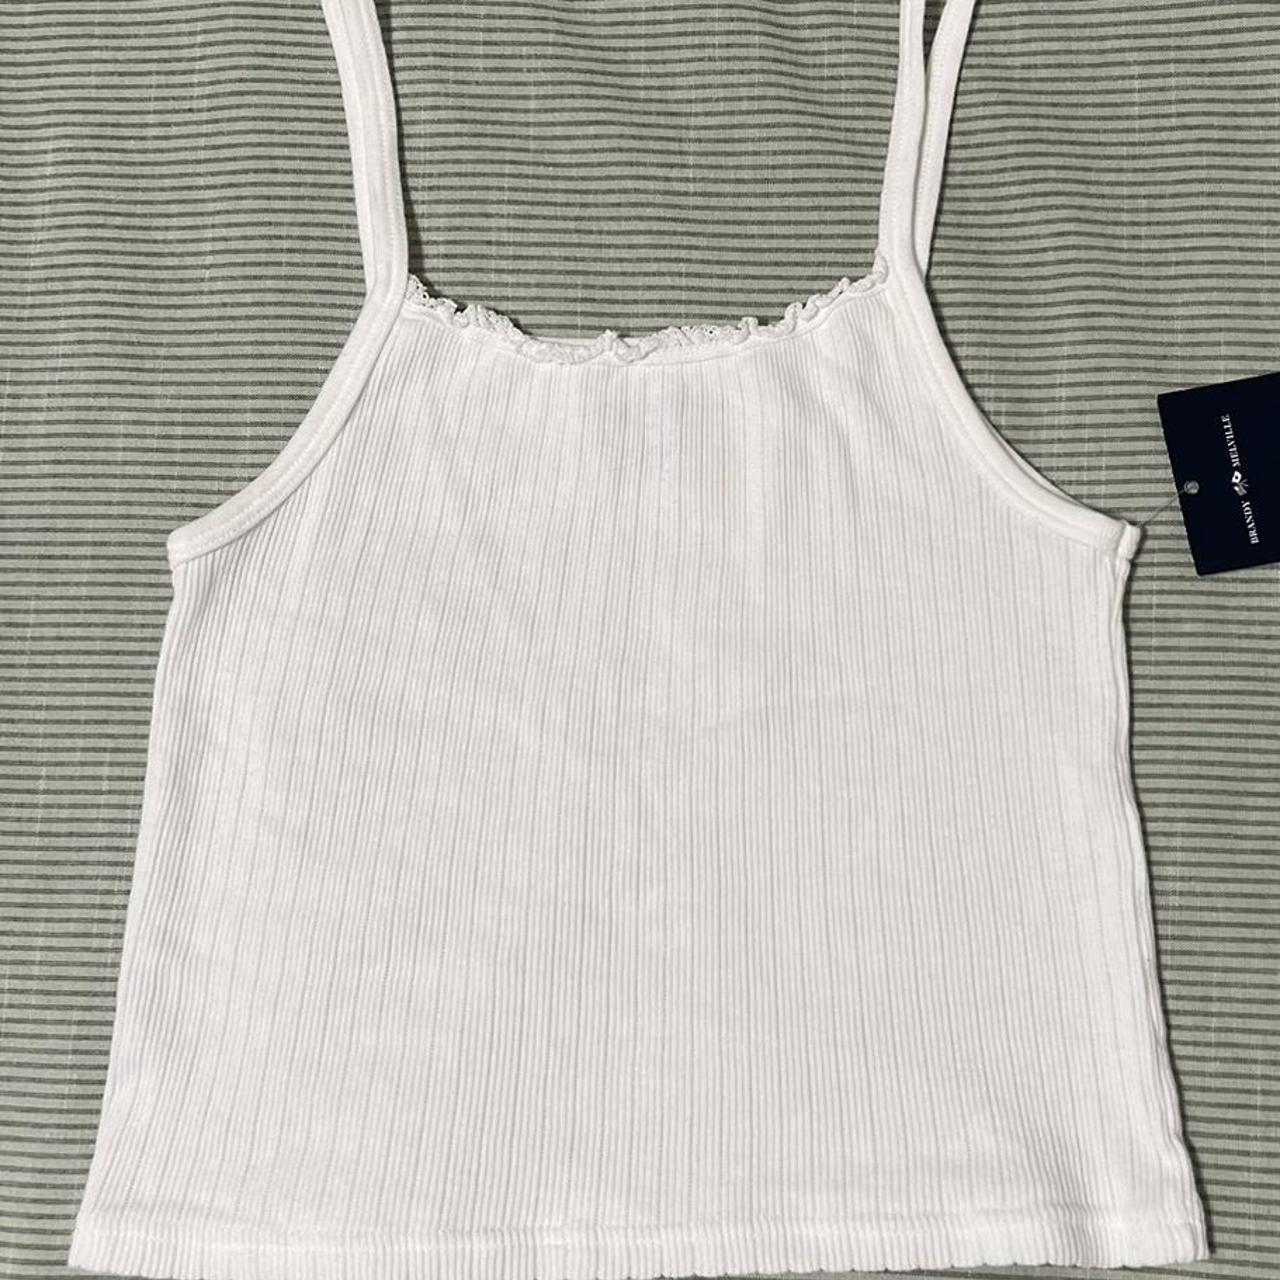 Brandy Melville - Belle Rib Lace Tank, In white 🤍, NWT